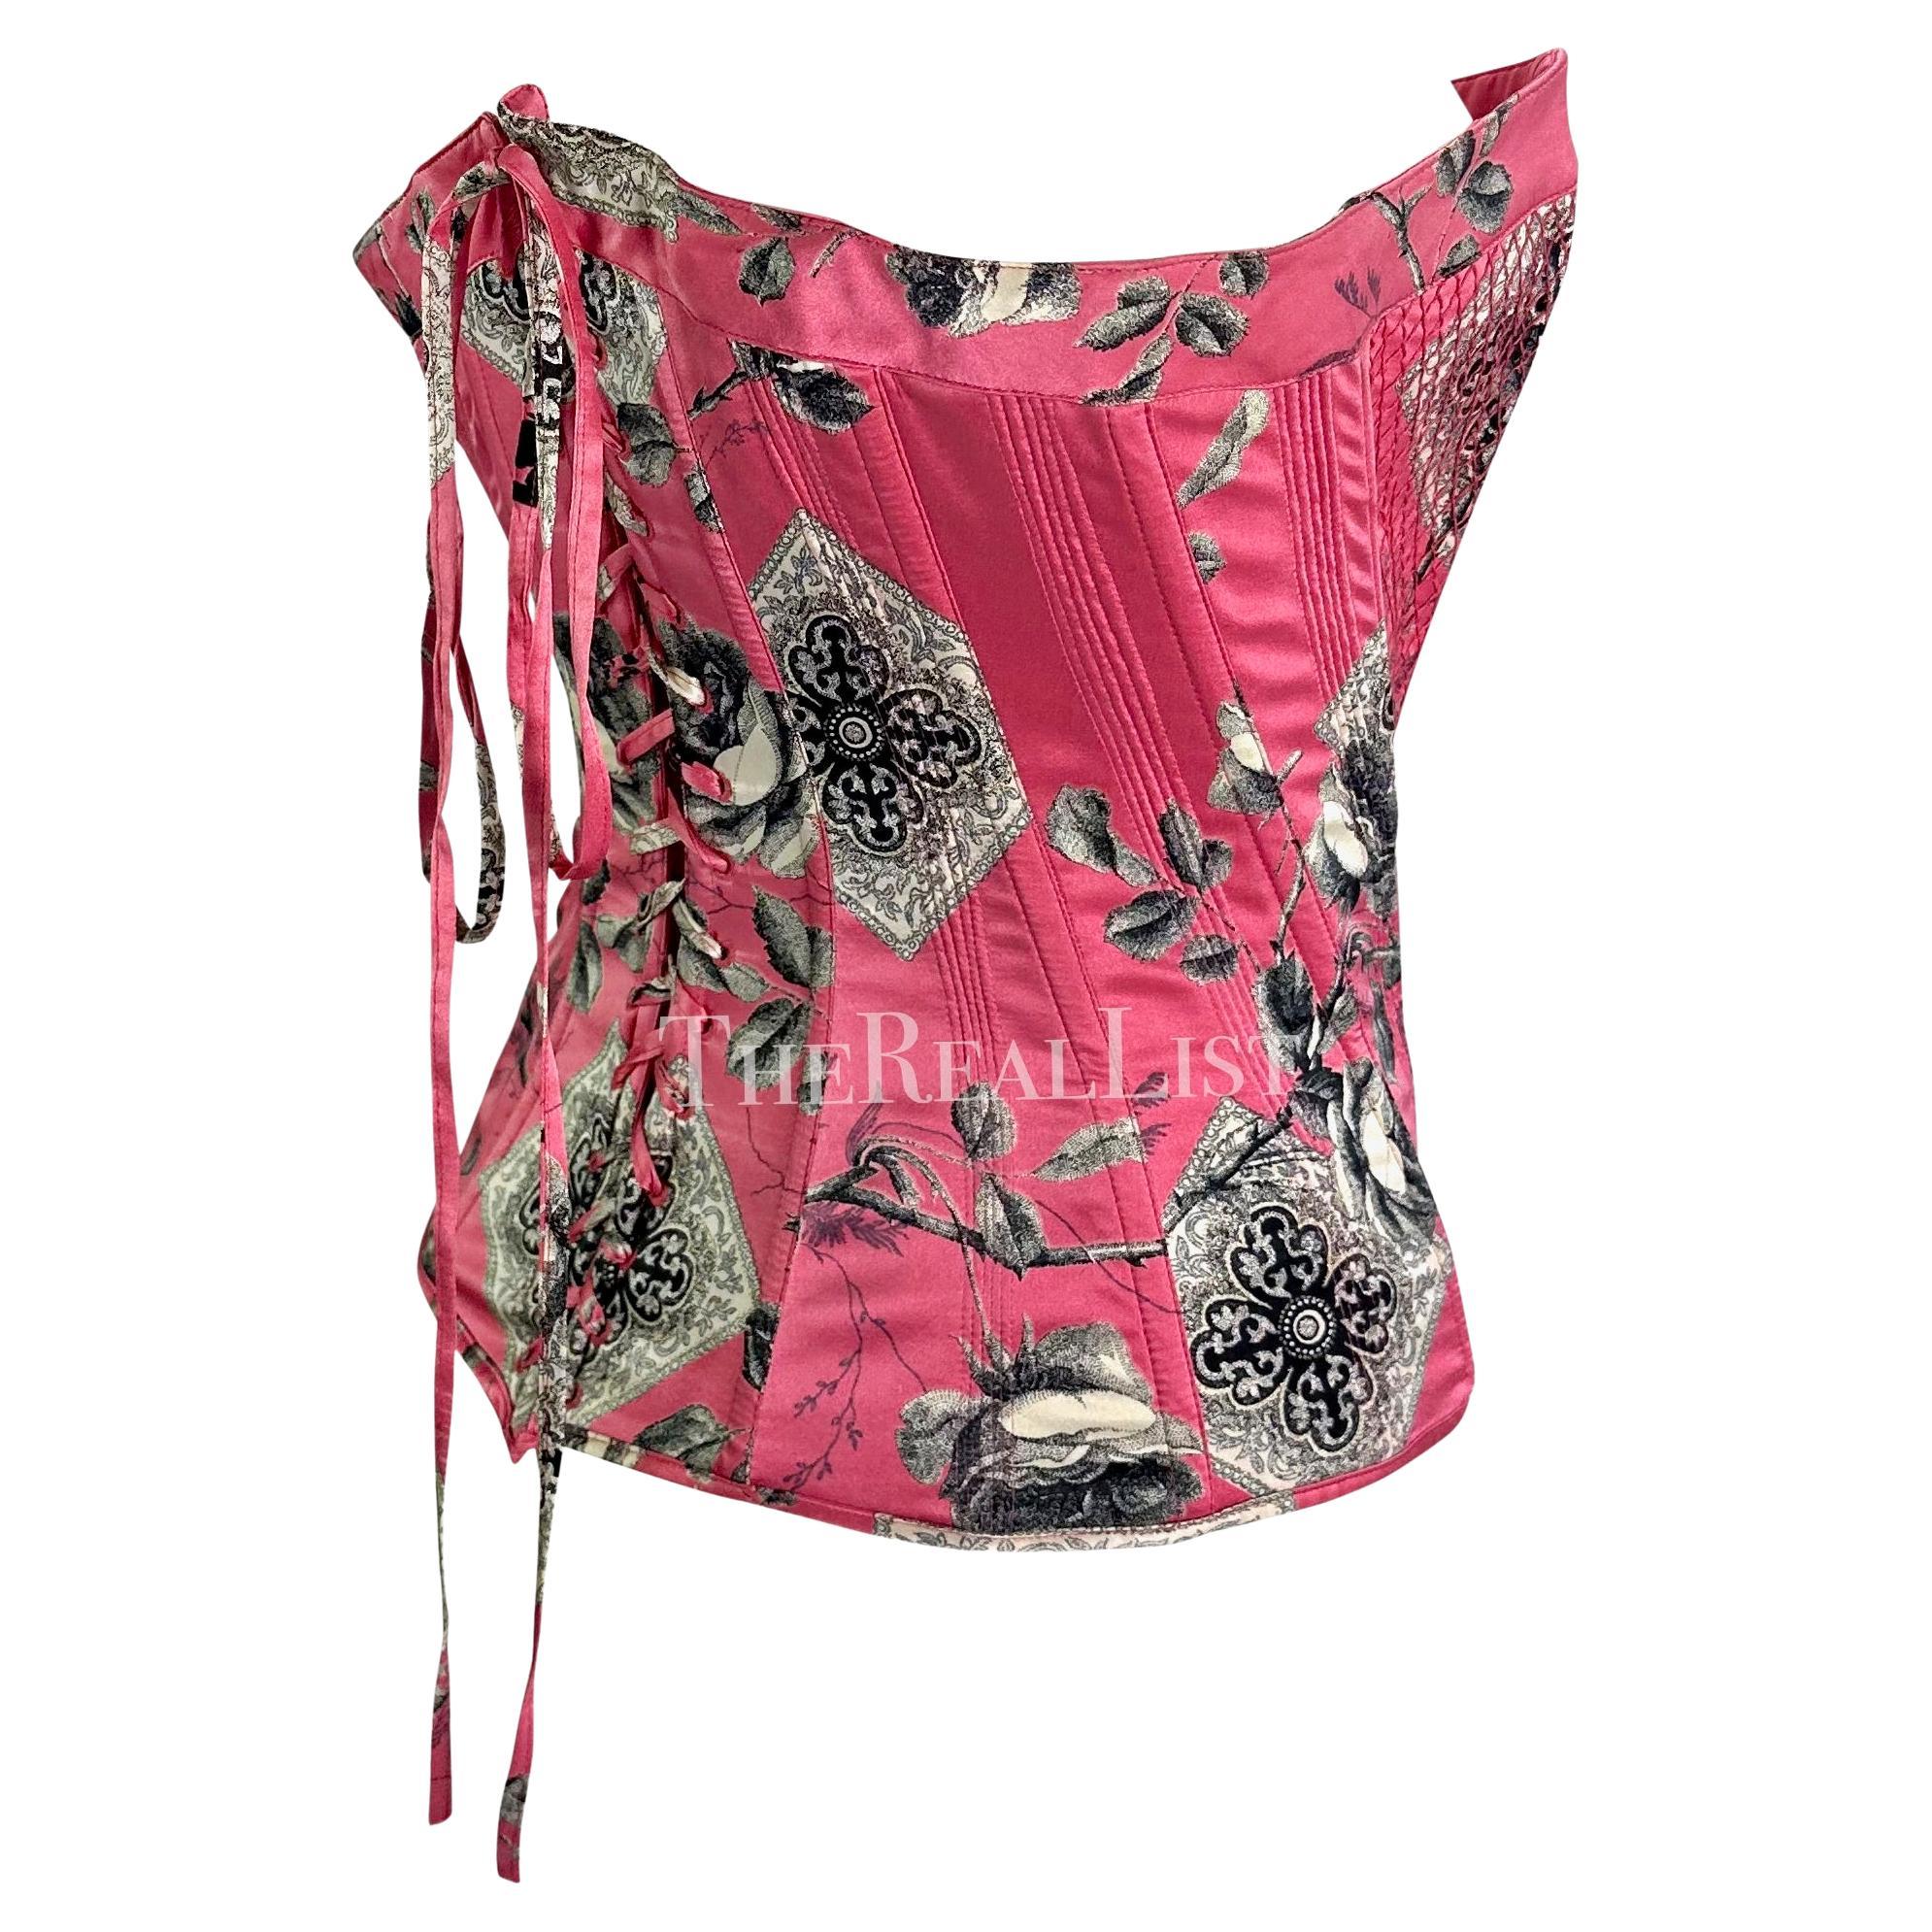 2004 Roberto Cavalli Pink Floral Quilted Silk Lace-Up Corset Bustier Top For Sale 1